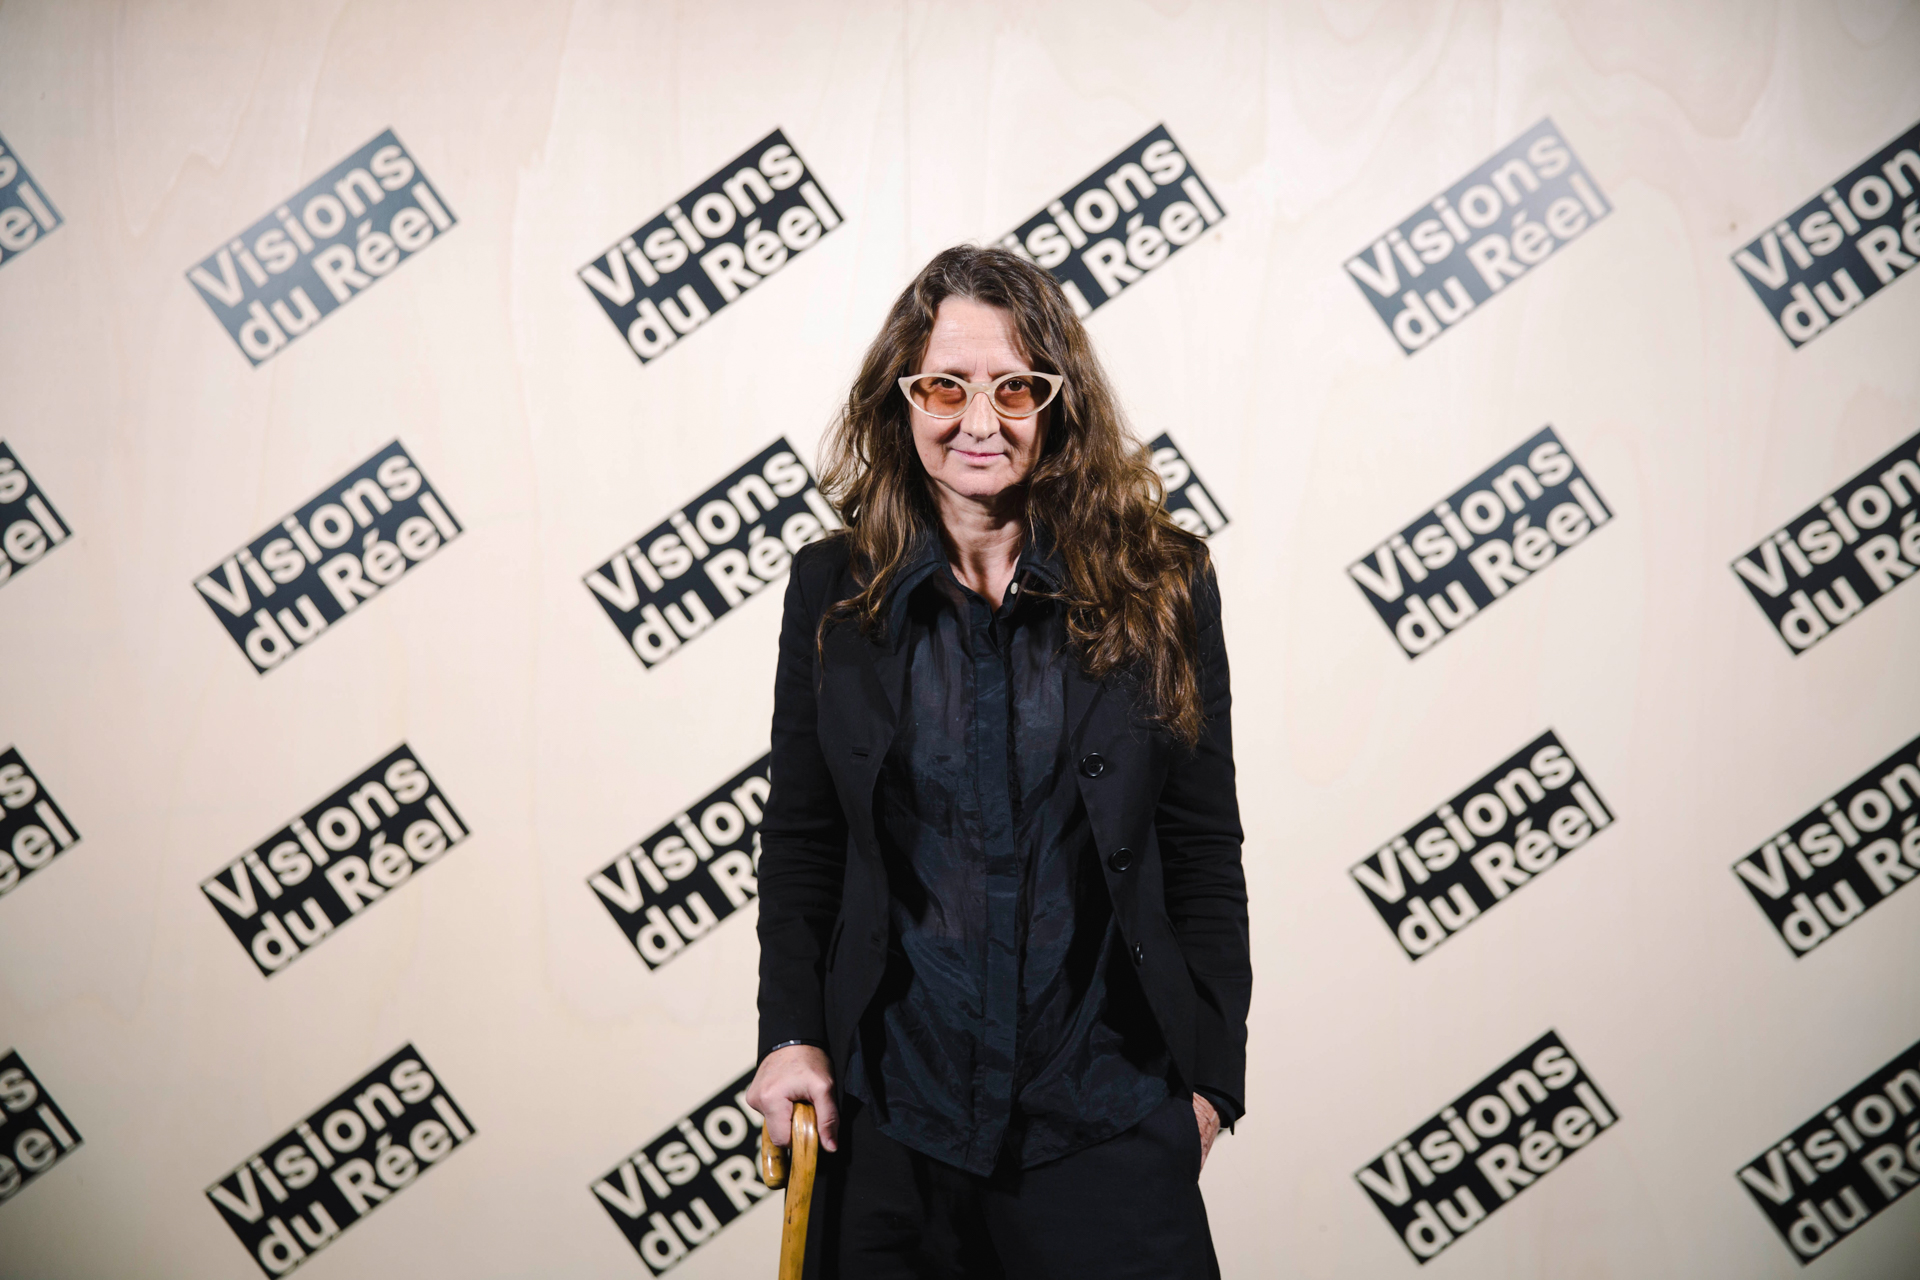 Lucrecia Martel at the Guest of Honour ceremony at the Nyon documentary film festival, Visions du Réel.